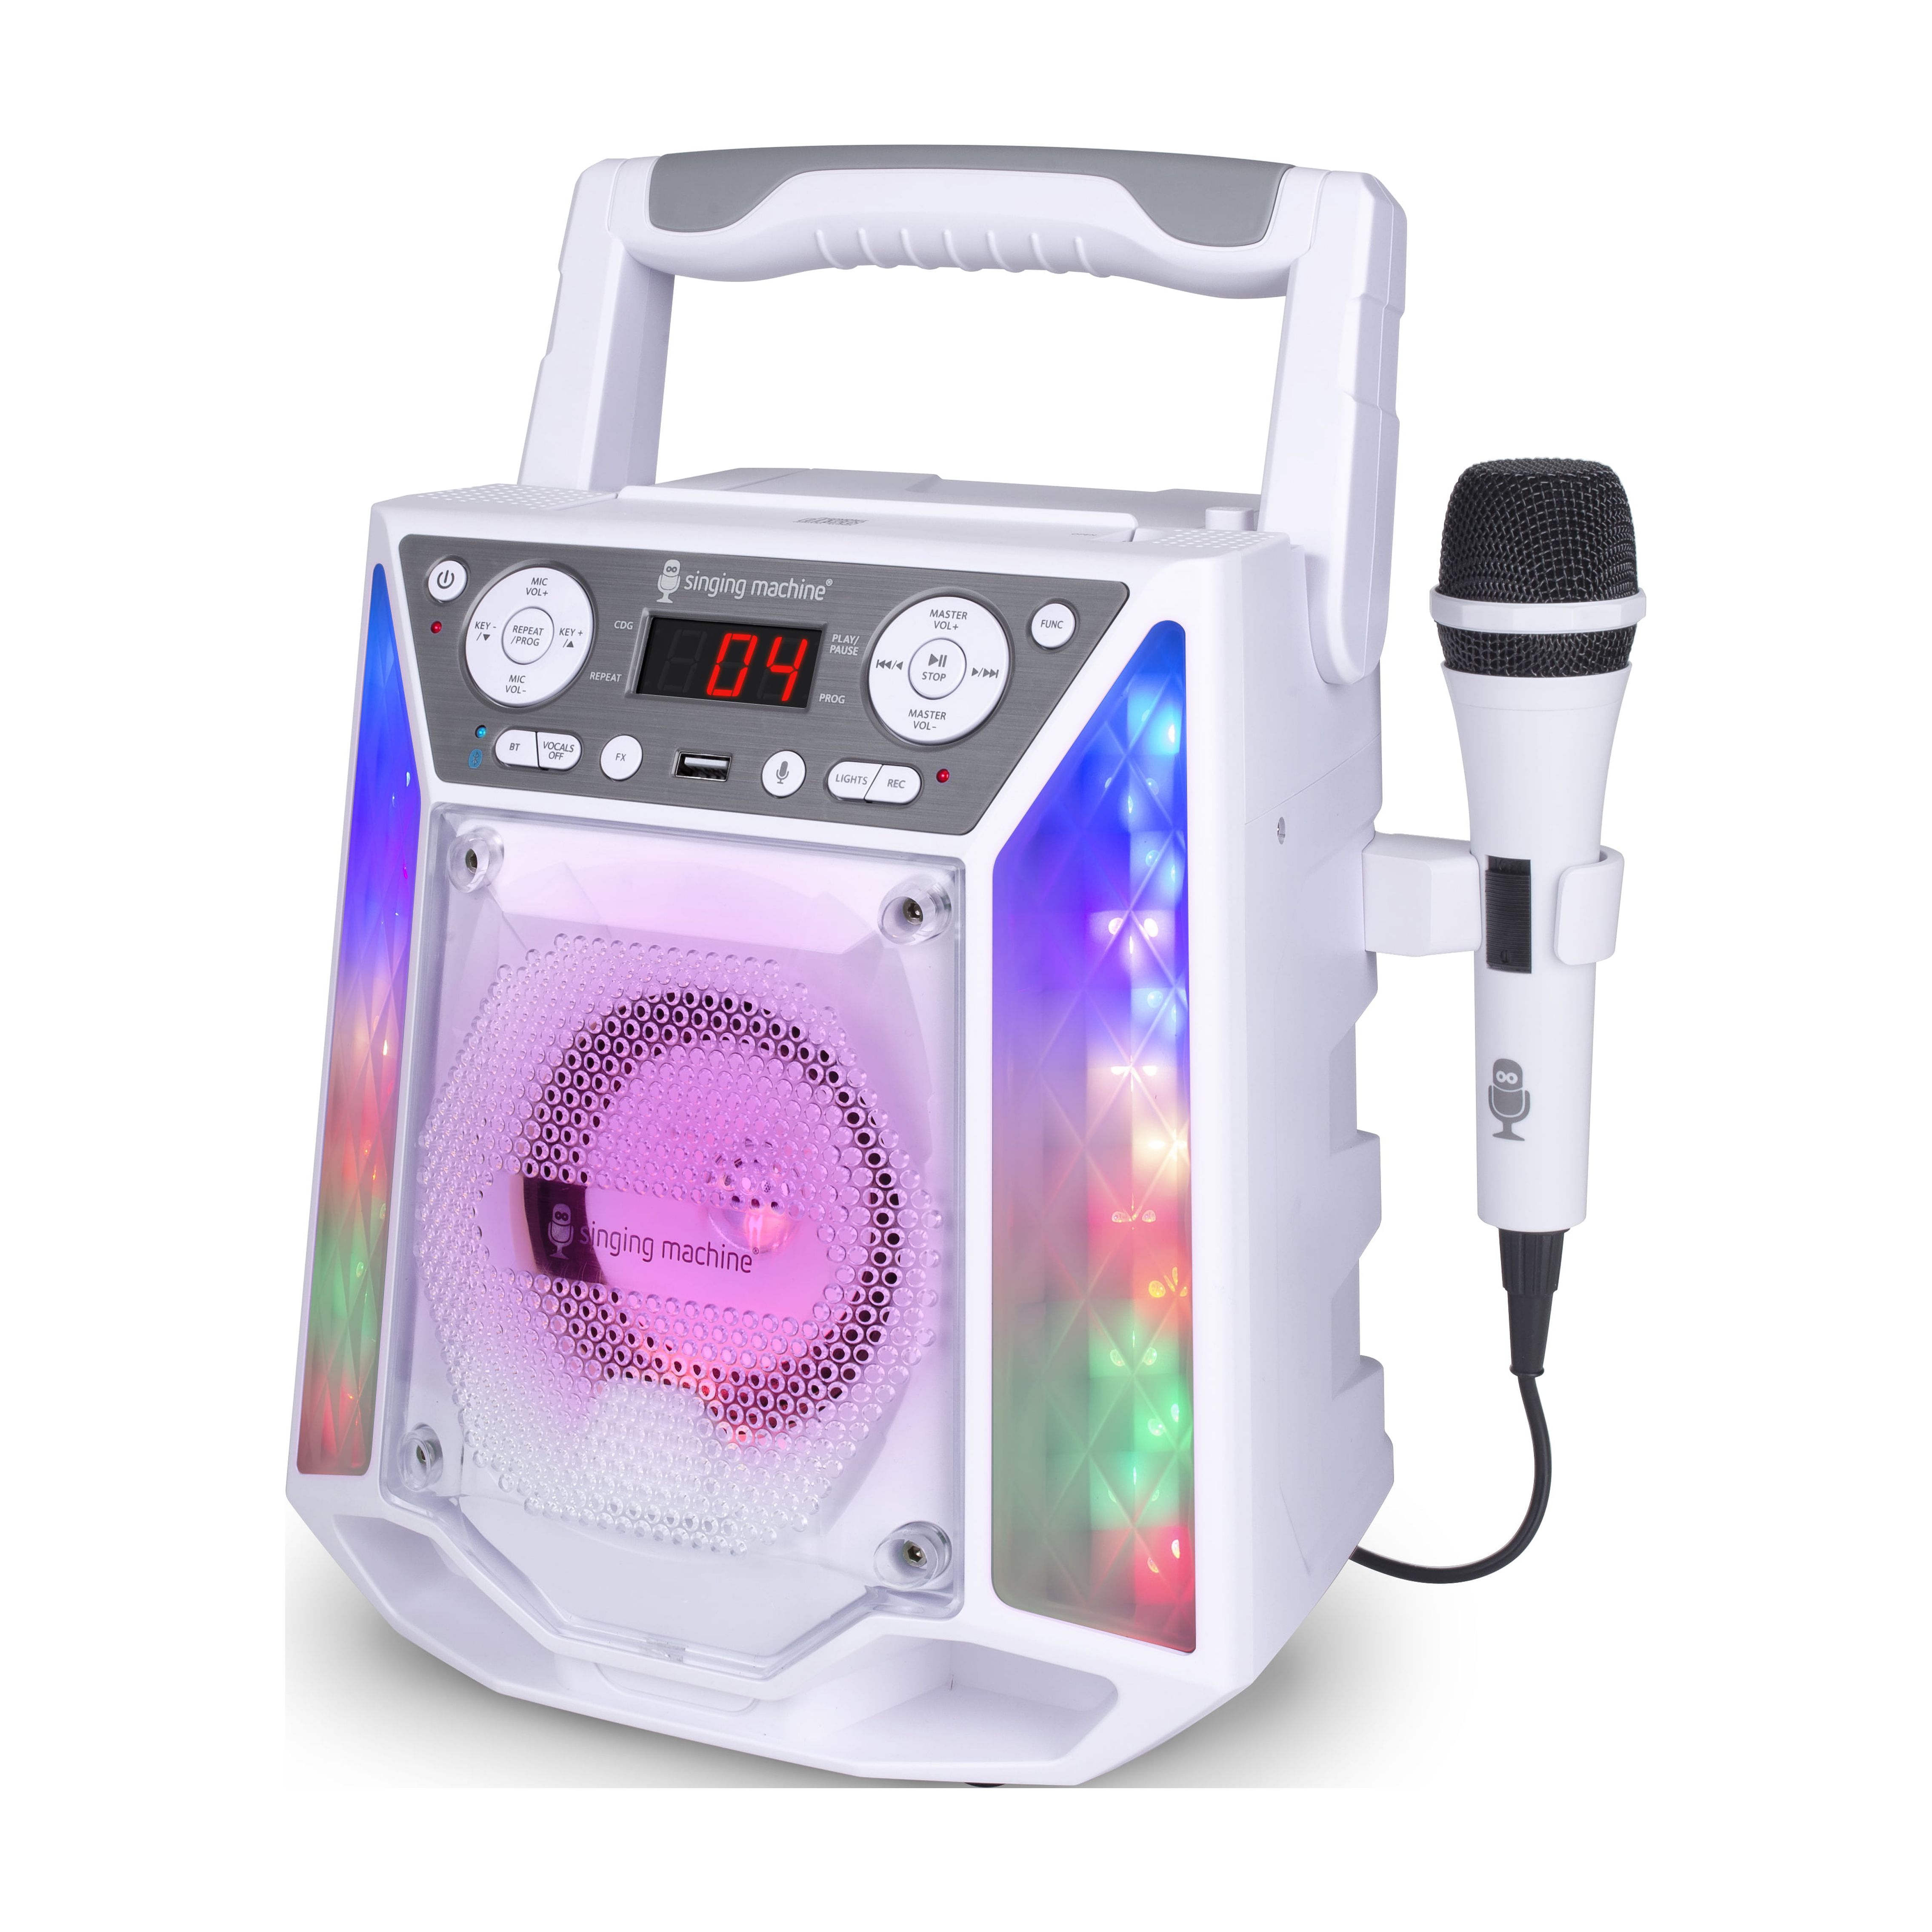 The Singing Machine Shine Voice SML2350 Karaoke Machine with Voice Assistant - image 4 of 7